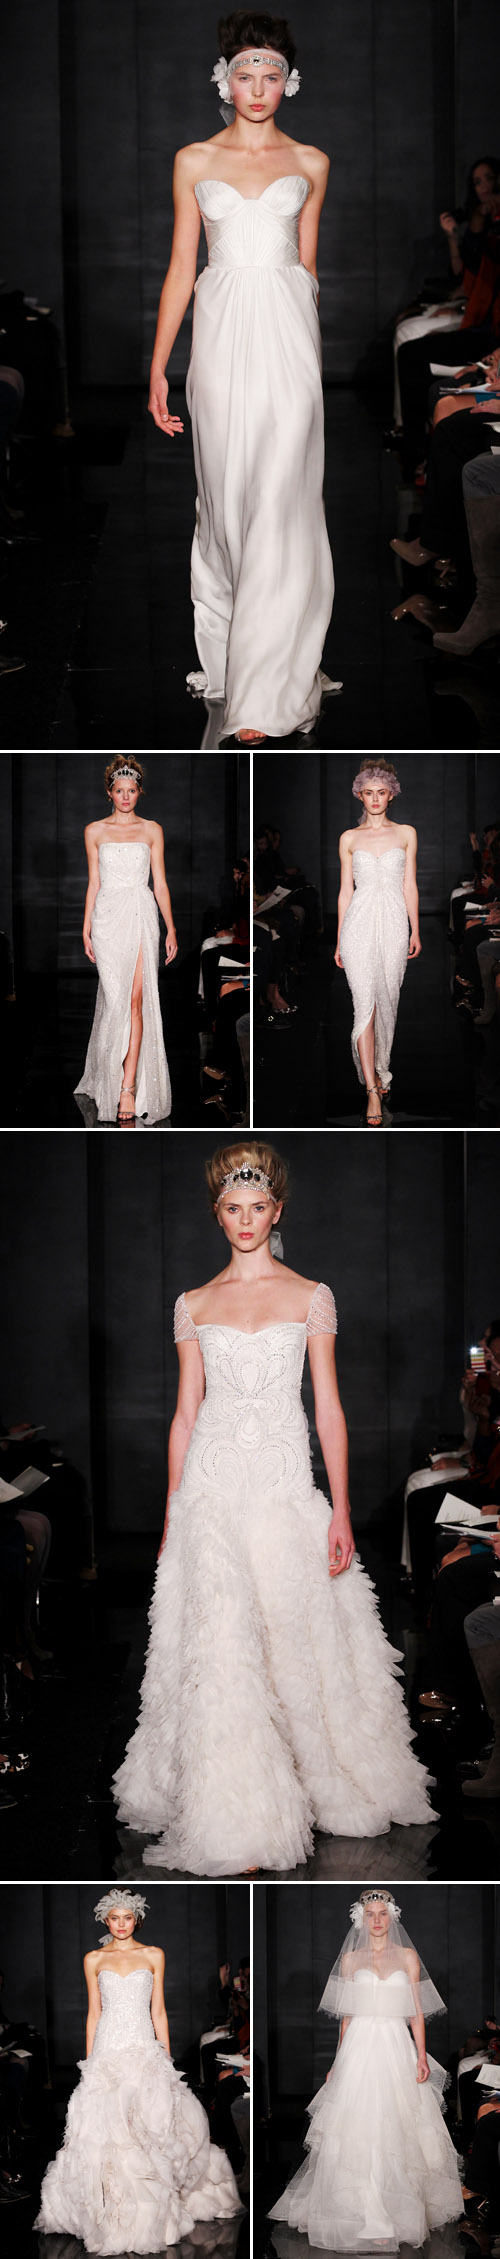 dramatic high fashion wedding dresses from Reem Acra Fall 2012 bridal collection